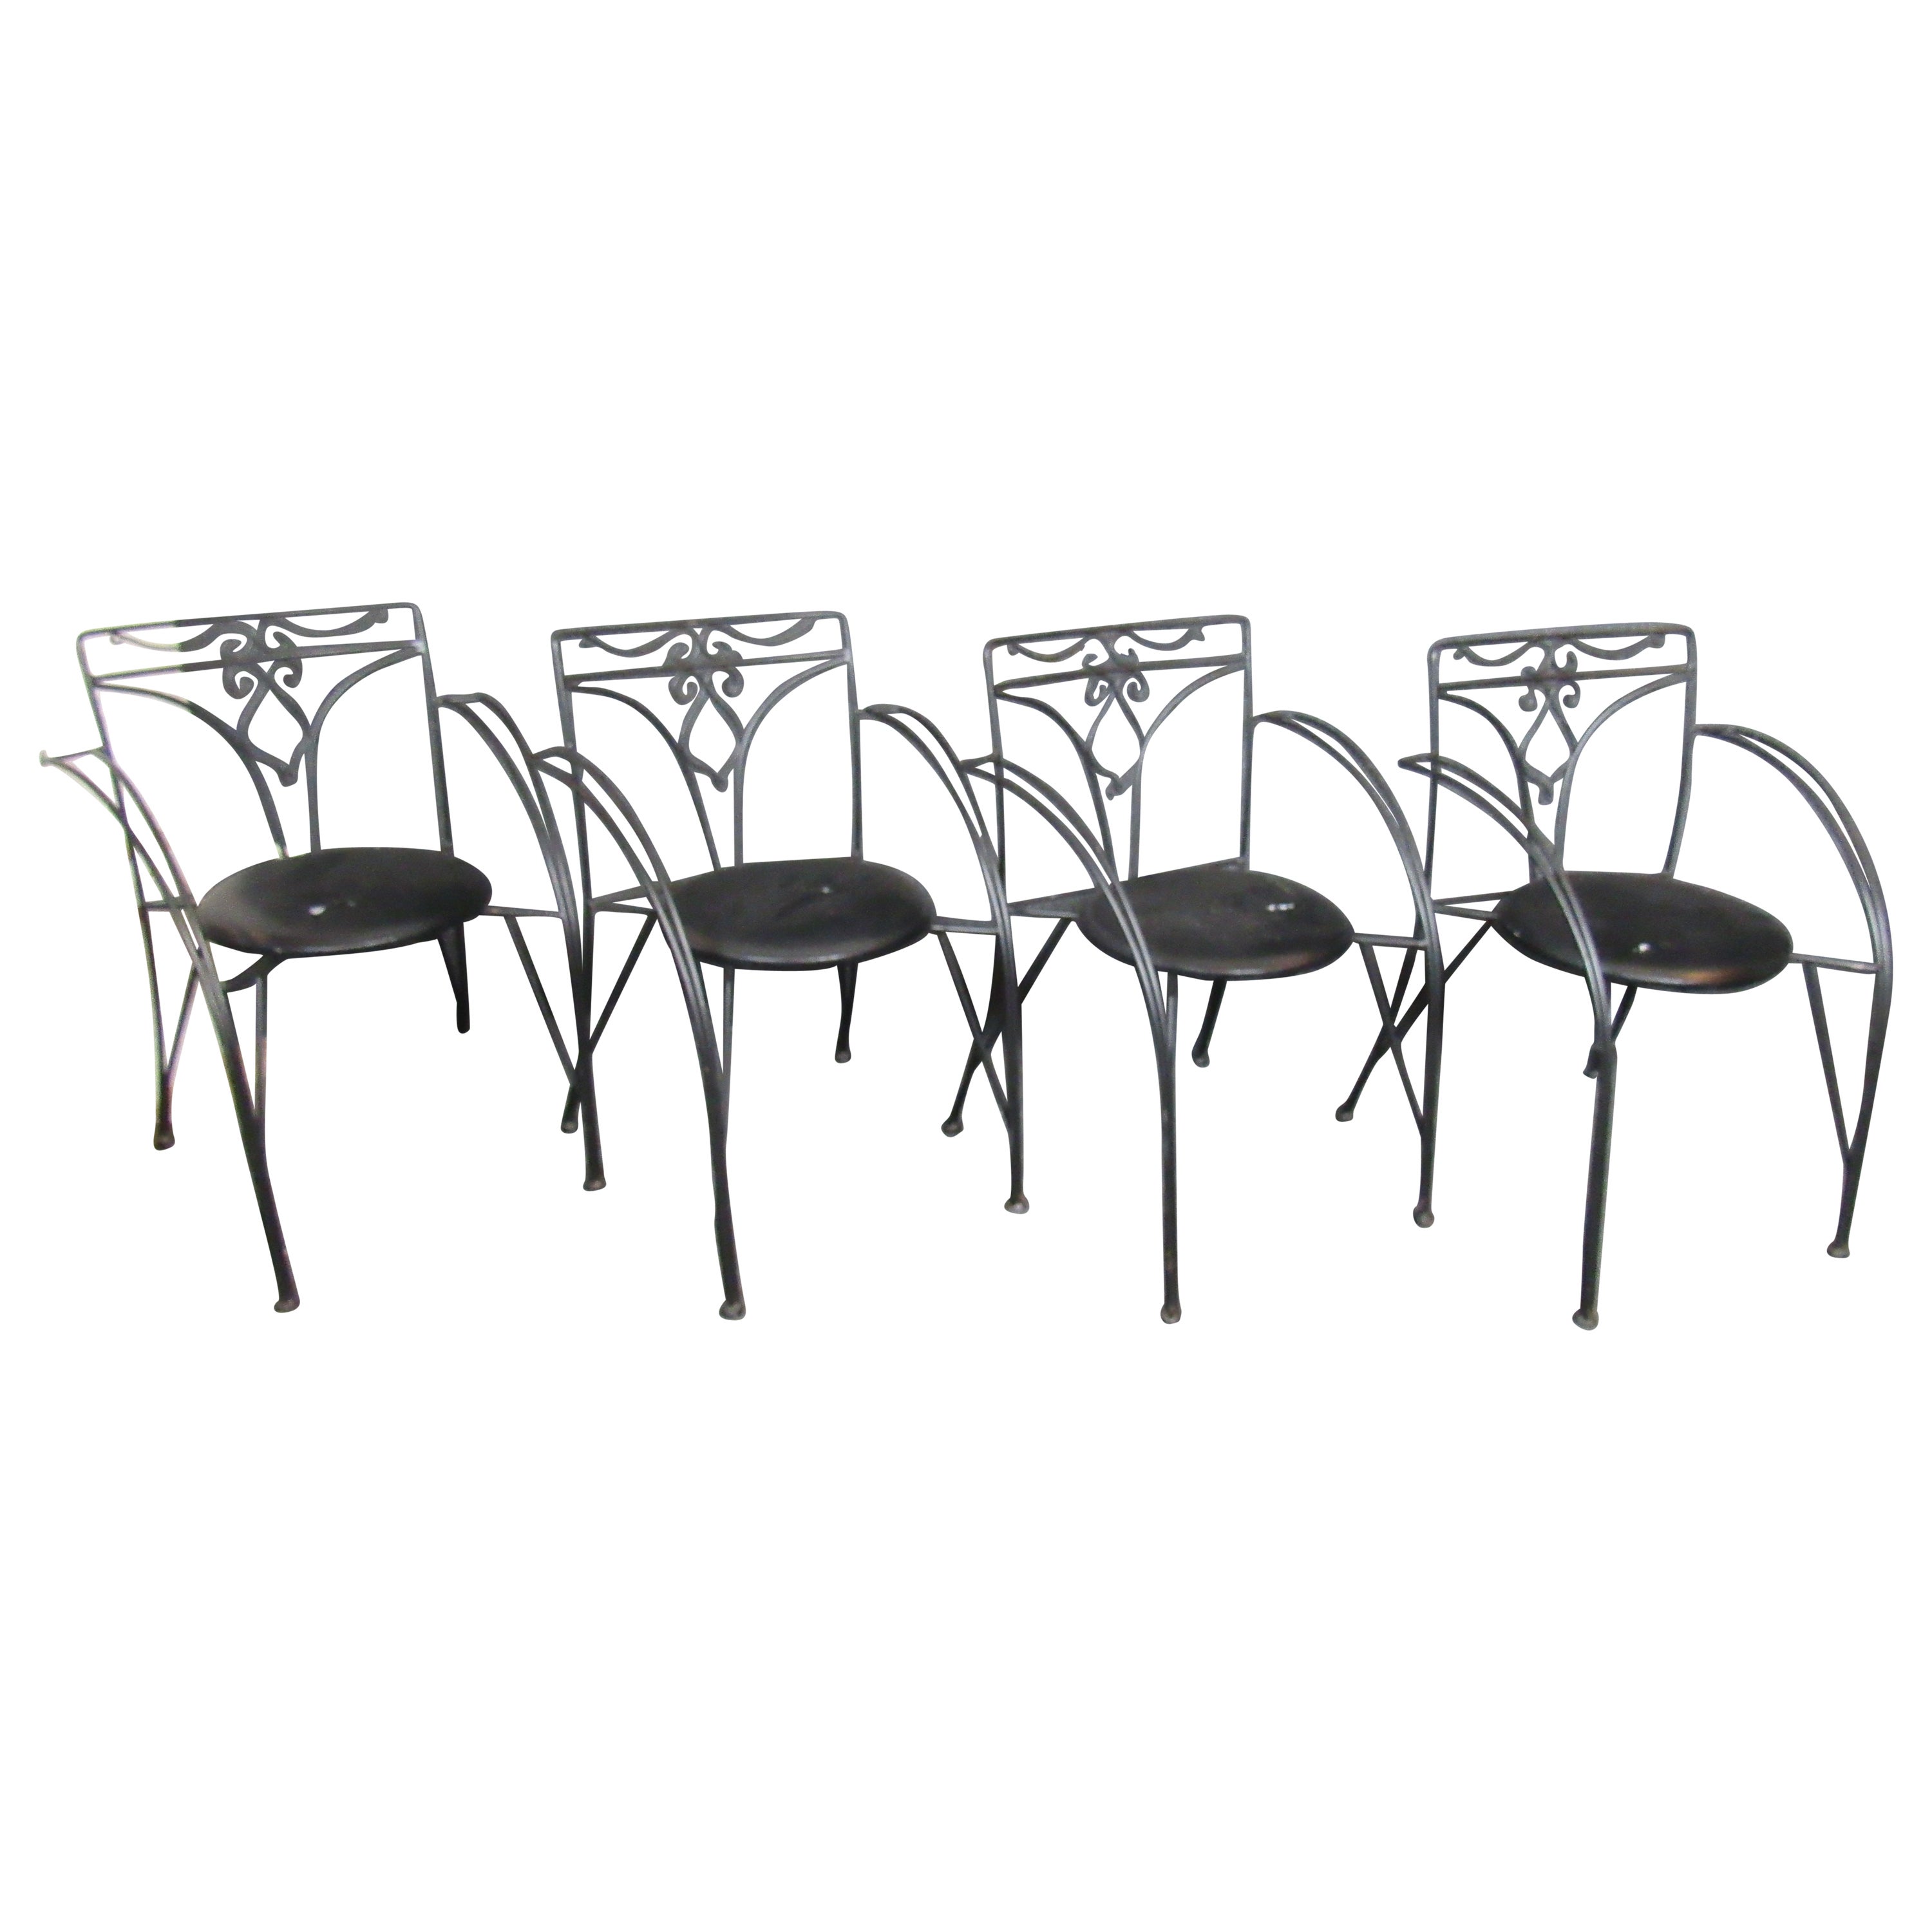 Iron Patio Chairs For Sale